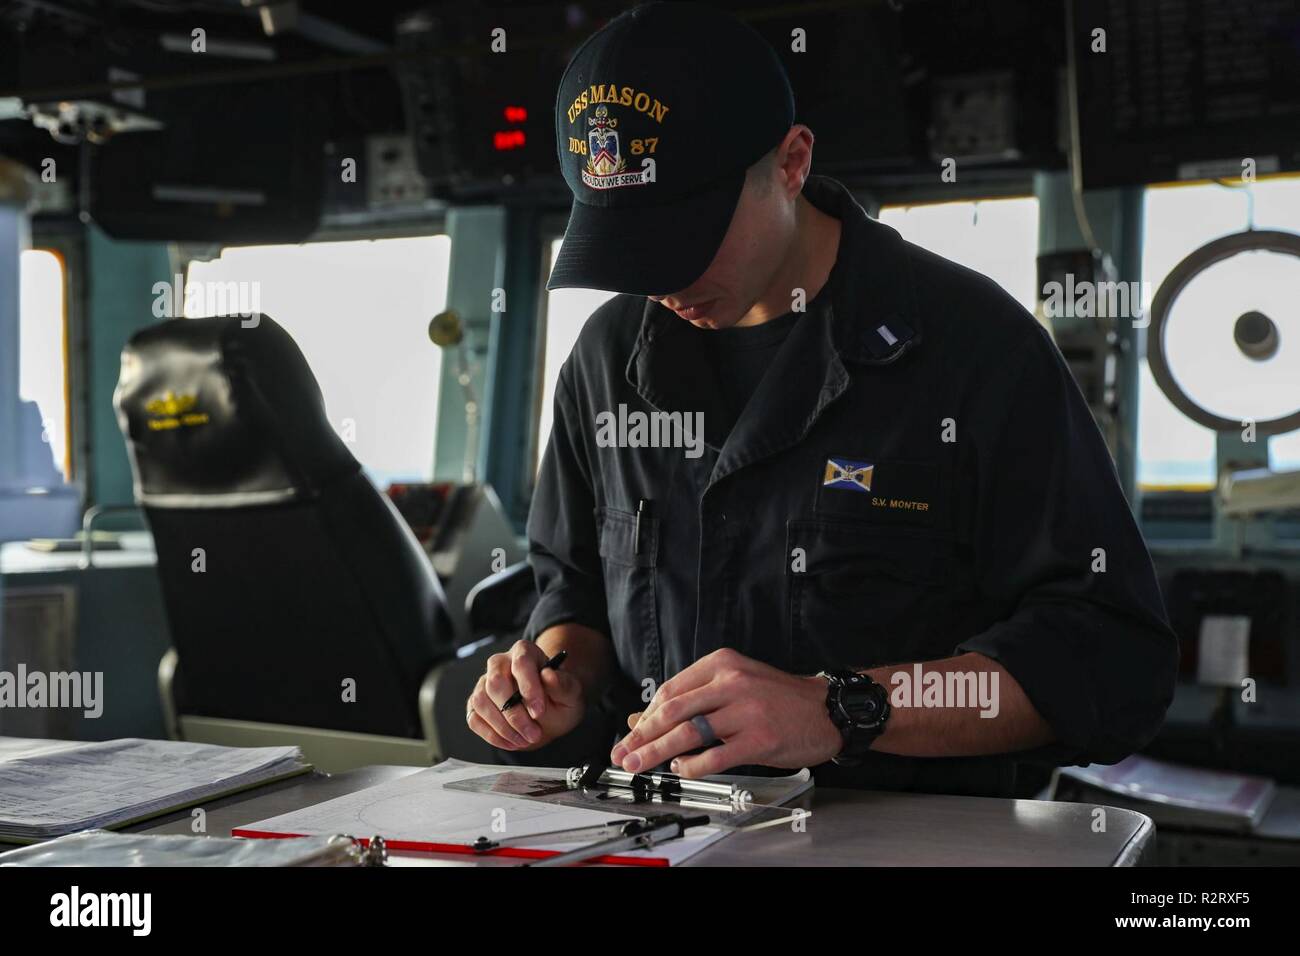 ATLANTIC OCEAN (Nov. 4. 2018) Lt. j.g. Scott Monter uses a maneuvering board to log contacts’ true course and true speed on the bridge aboard the guided-missile destroyer USS Mason (DDG 87). USS Abraham Lincoln (CVN 72) Carrier Strike Group (CSG) cruiser-destroyer (CRUDES) units are completing the first east coast CRUDES Surface Warfare Advanced Tactical Training (SWATT) exercise. SWATT is led by the Naval Surface and Mine Warfighting Development Center (SMWDC) and is designed to increase warfighting proficiency, lethality, and interoperability of participating units. Stock Photo